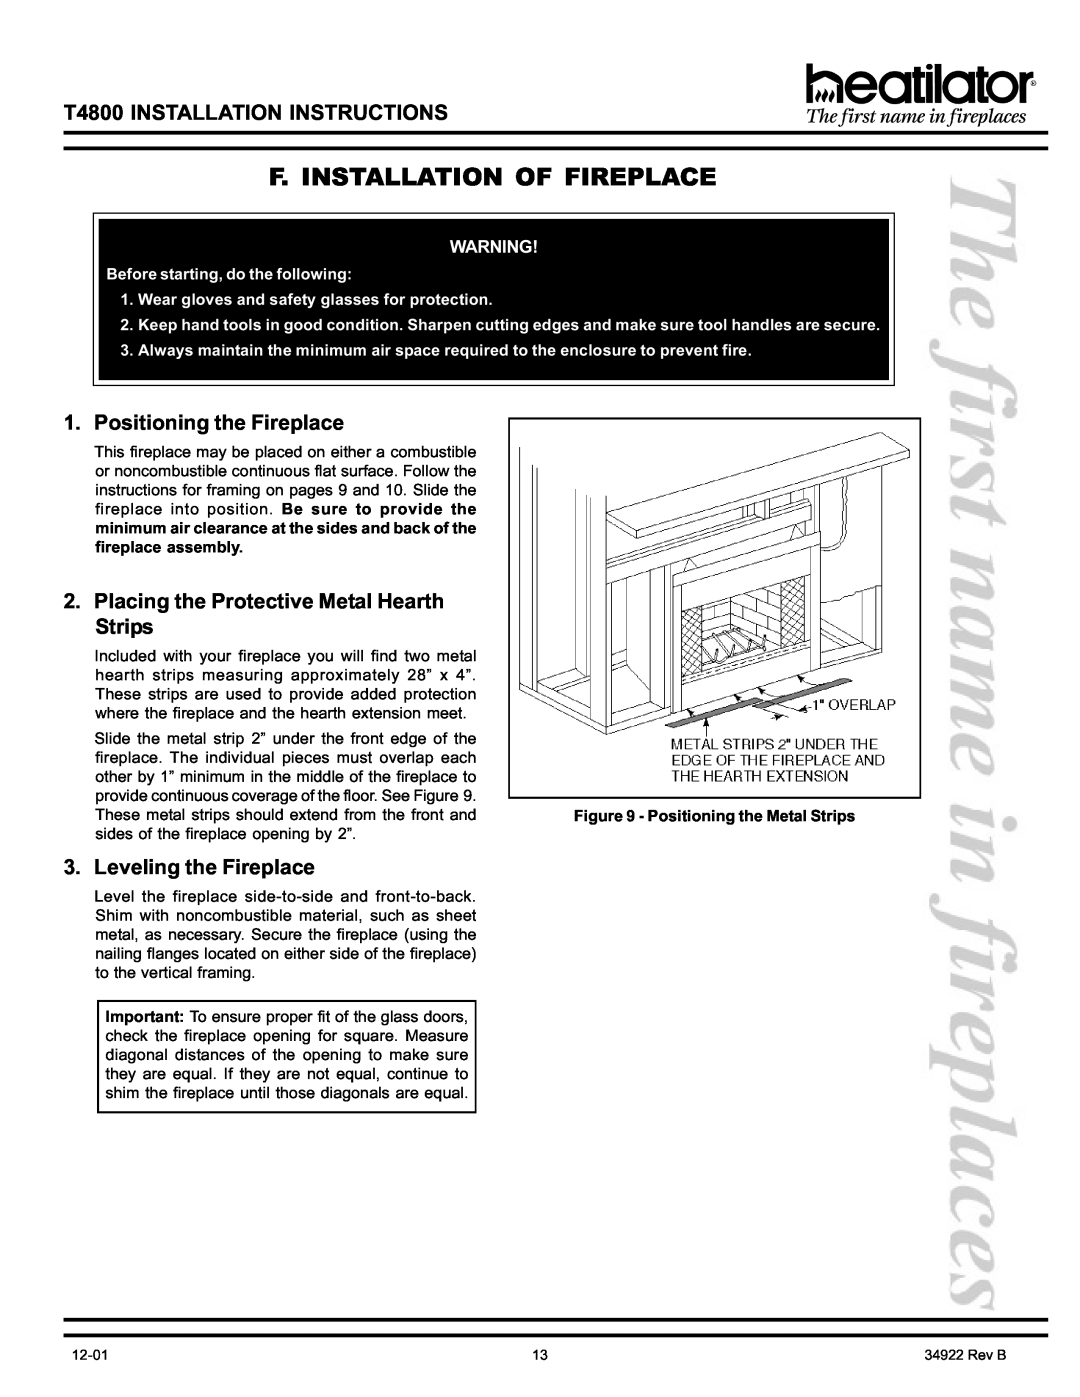 Heatiator T4800 manual F. Installation Of Fireplace, Positioning the Fireplace, Placing the Protective Metal Hearth, Strips 